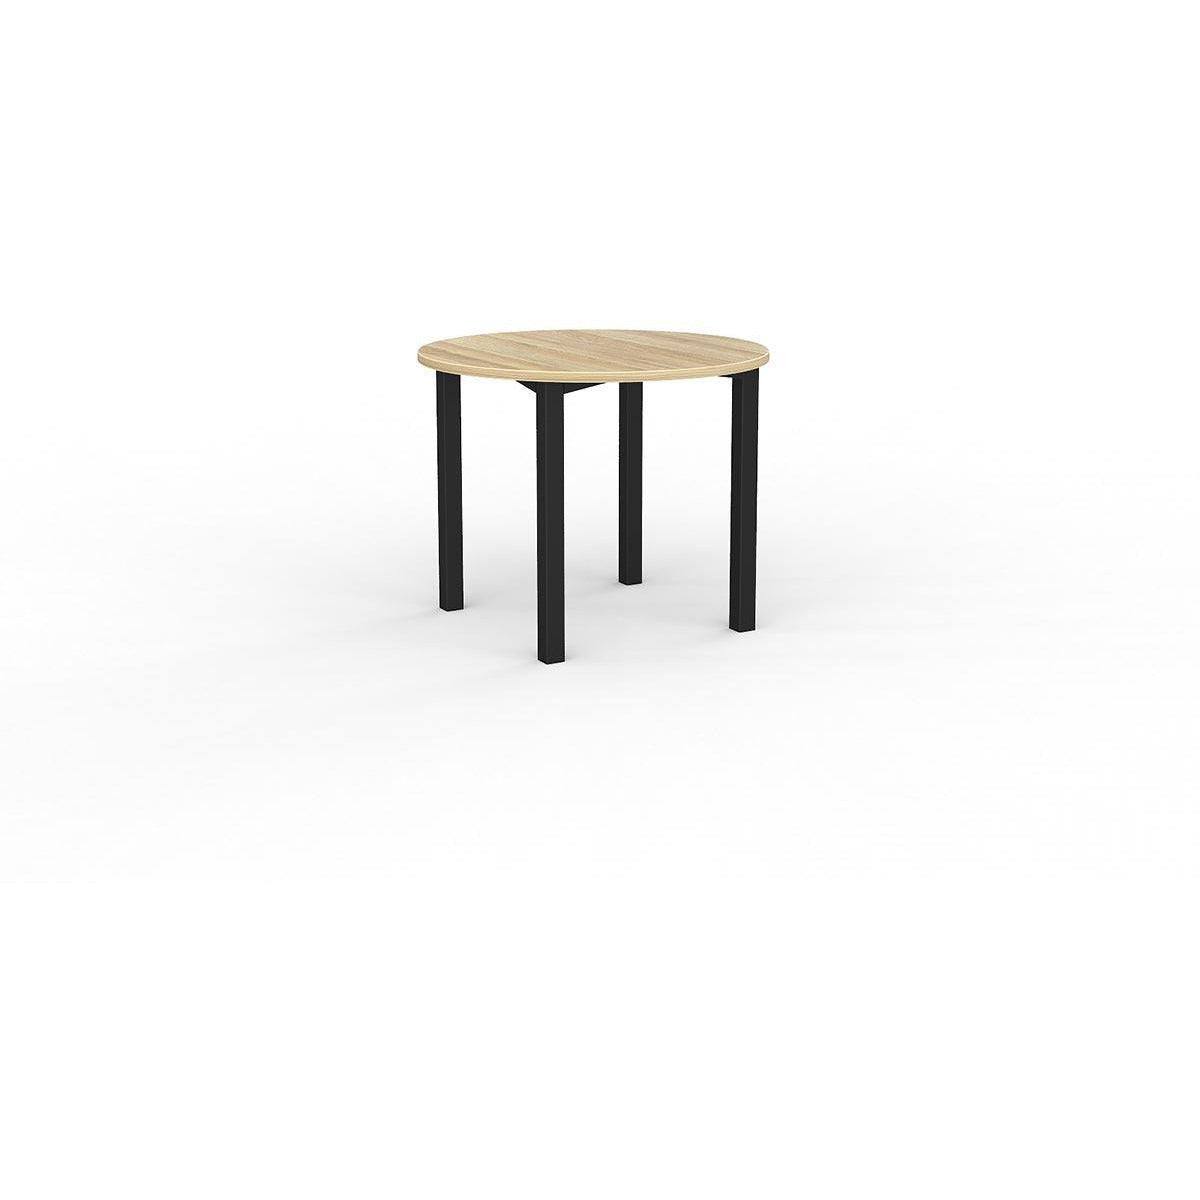 Axis Round Meeting Table - Office Furniture Company 